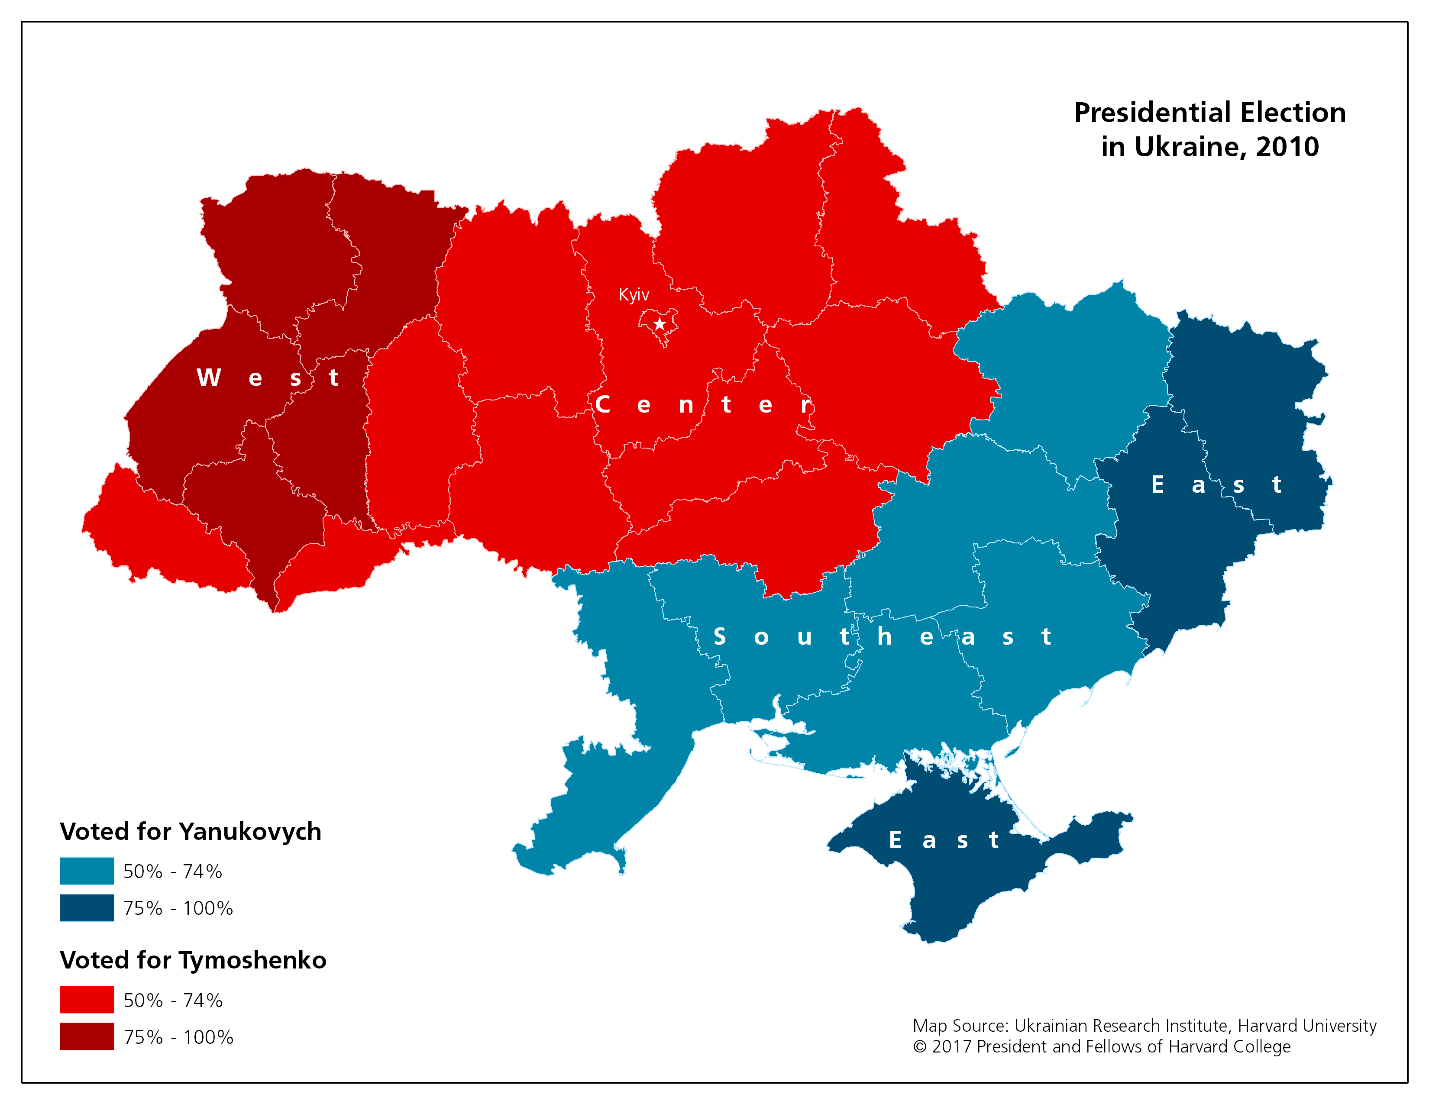 Presidential Election, 2010